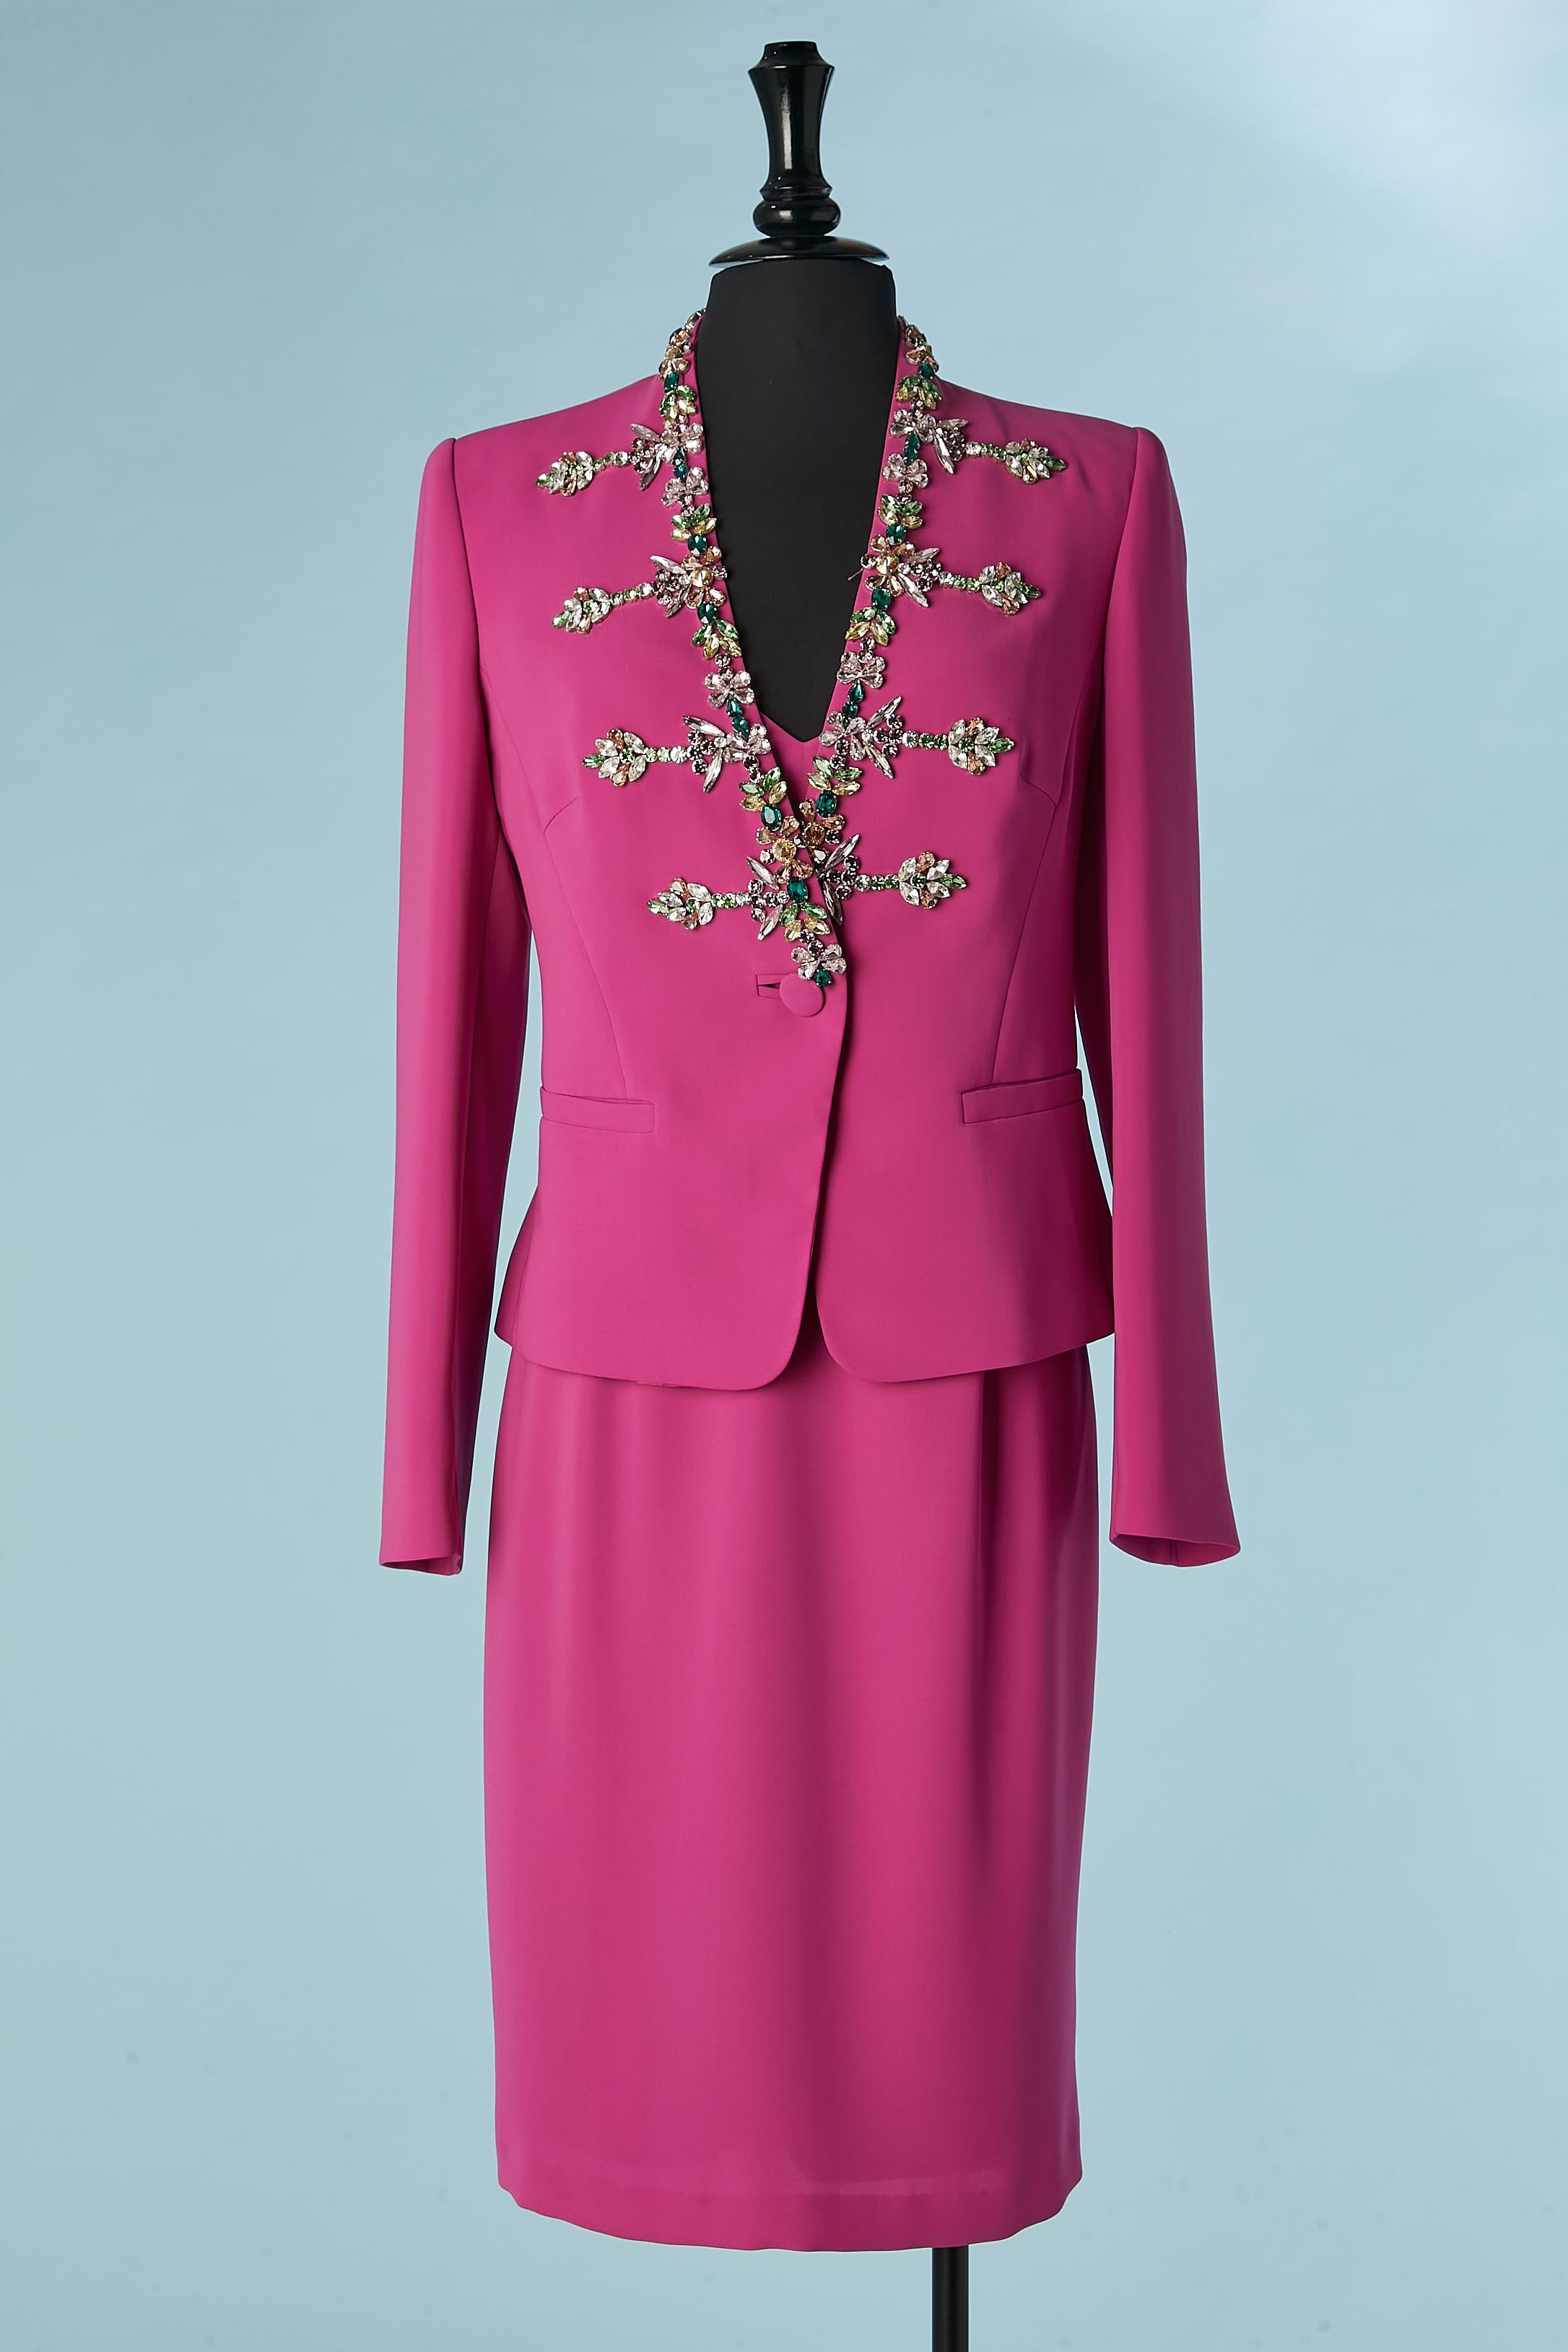 Fushia jacket with rhinestone and dress cocktail ensemble. 
Main fabric and lining: 100% polyester. 
Shoulder pad. Cut-work. Pocket on both side. 
SIZE 42 (It) 38 (Fr) M 